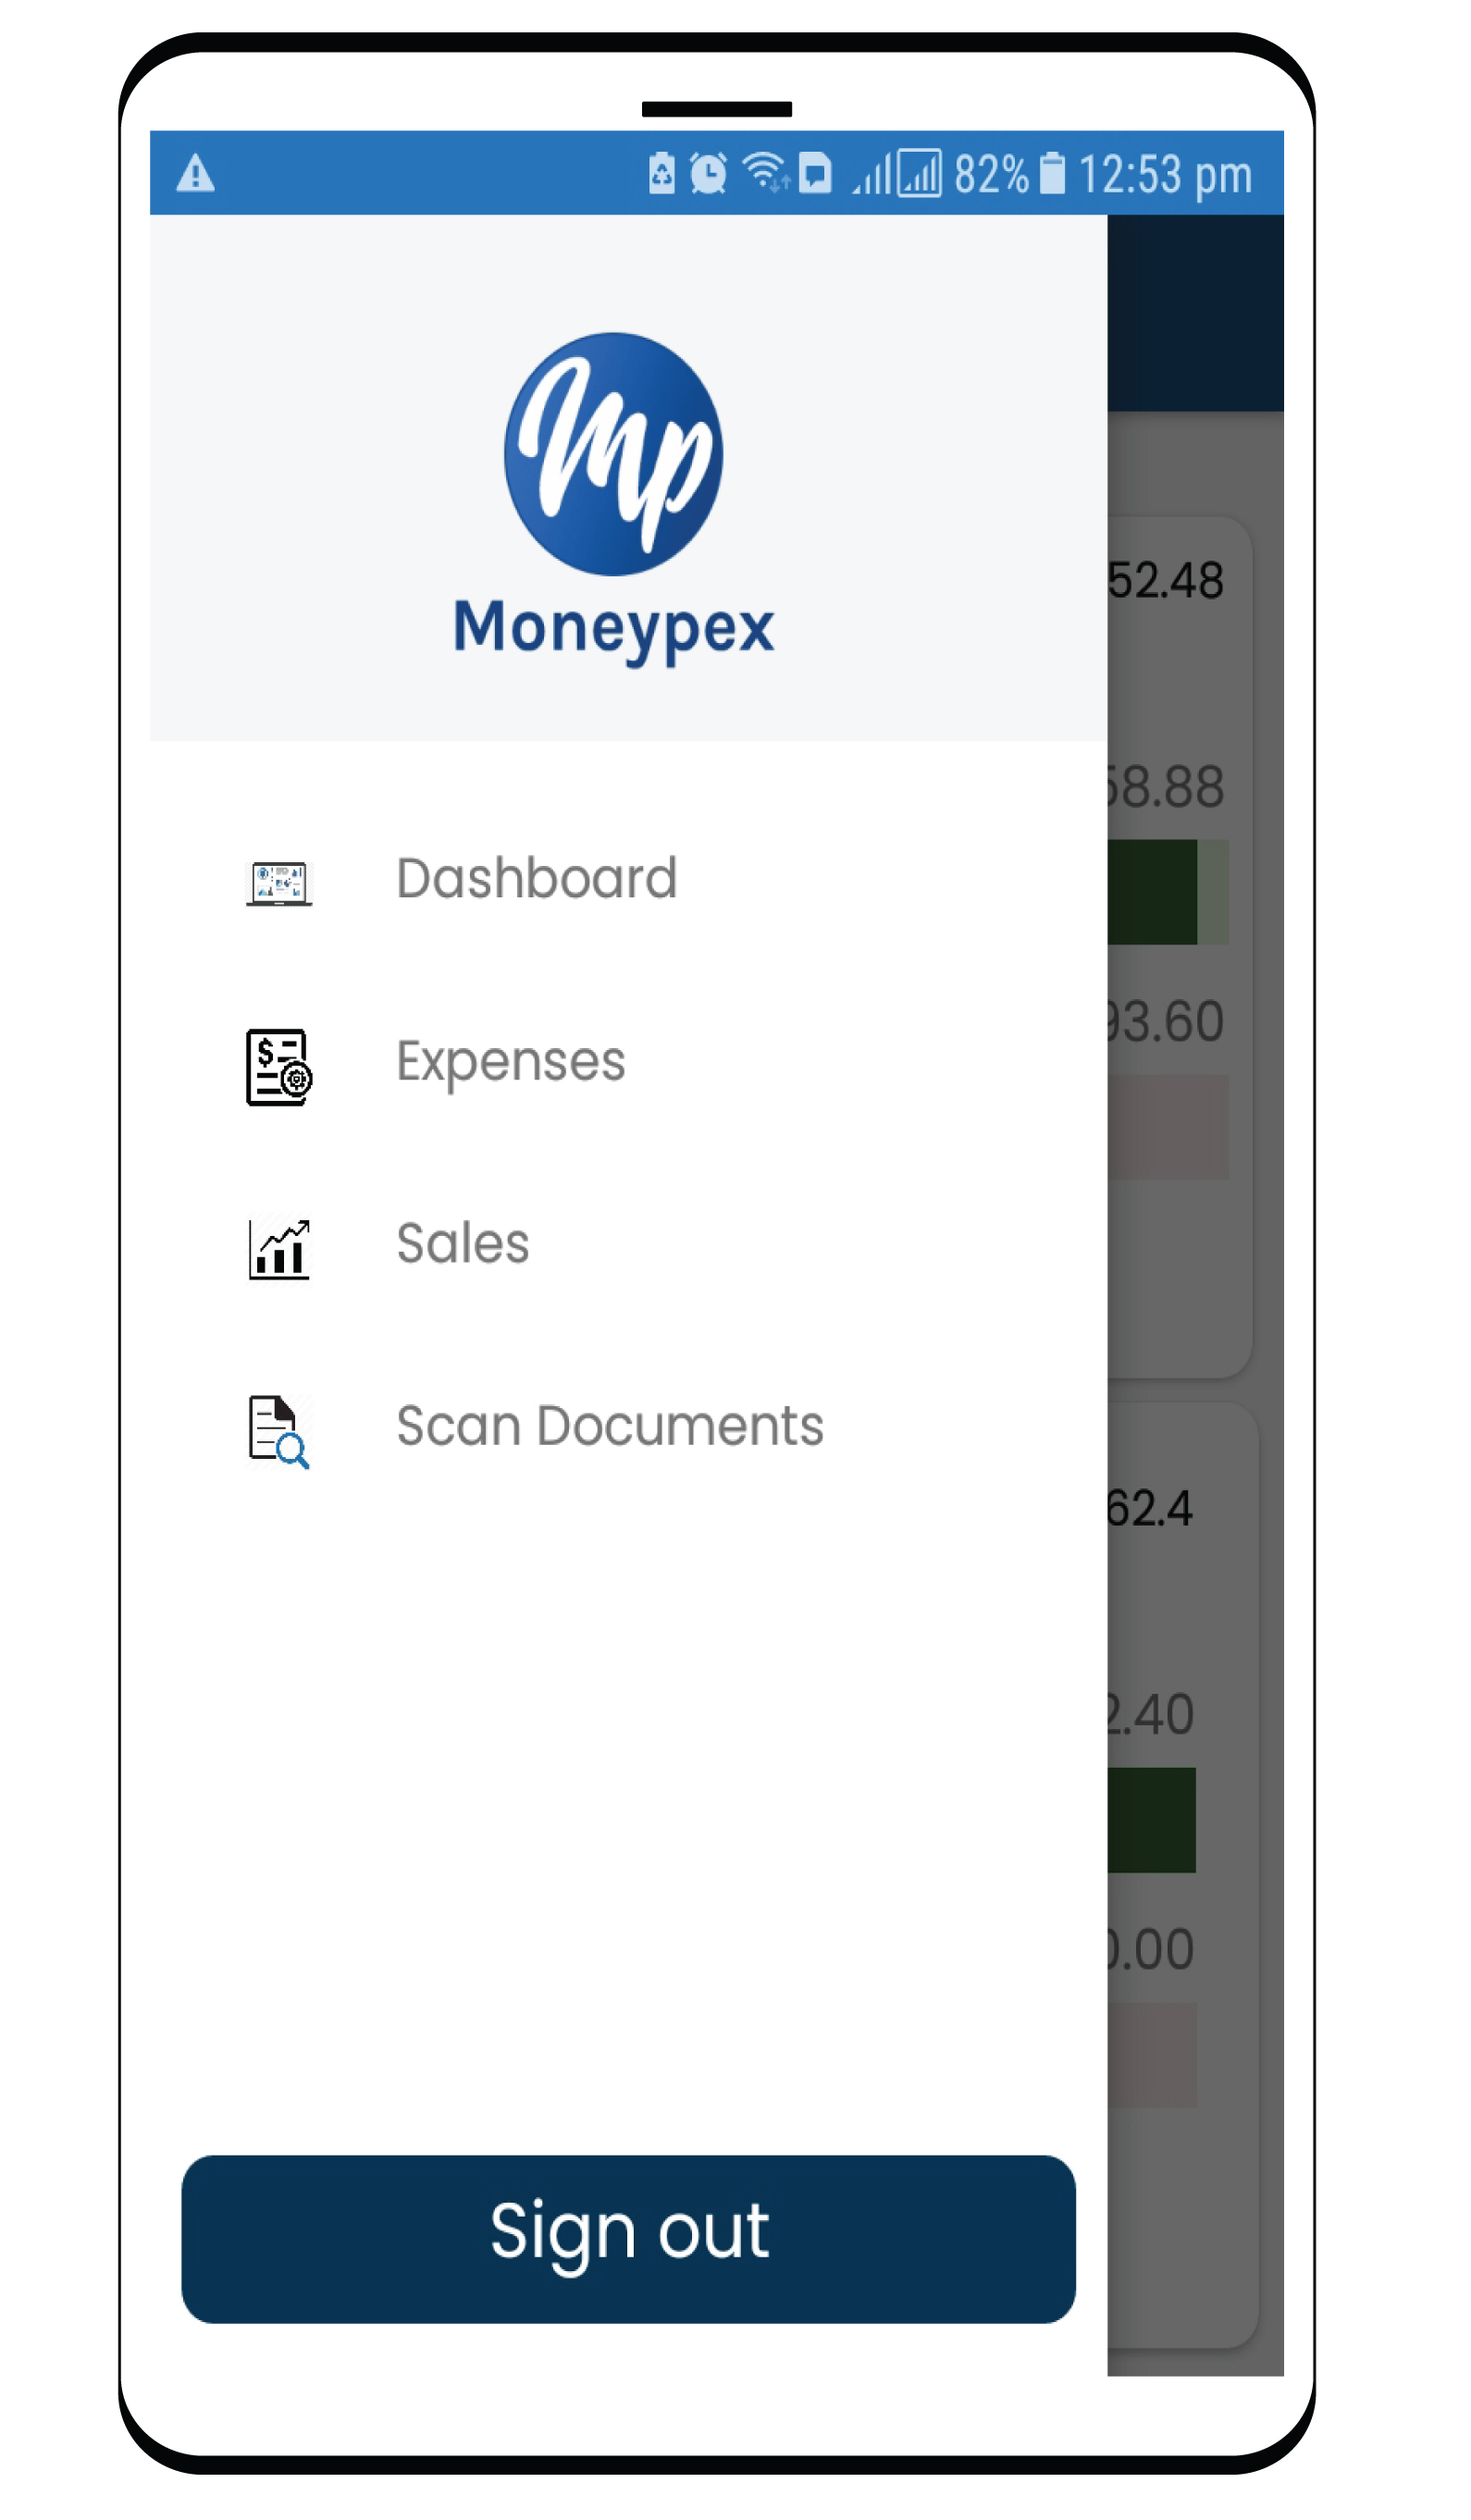 Moneypex | Accounting Software